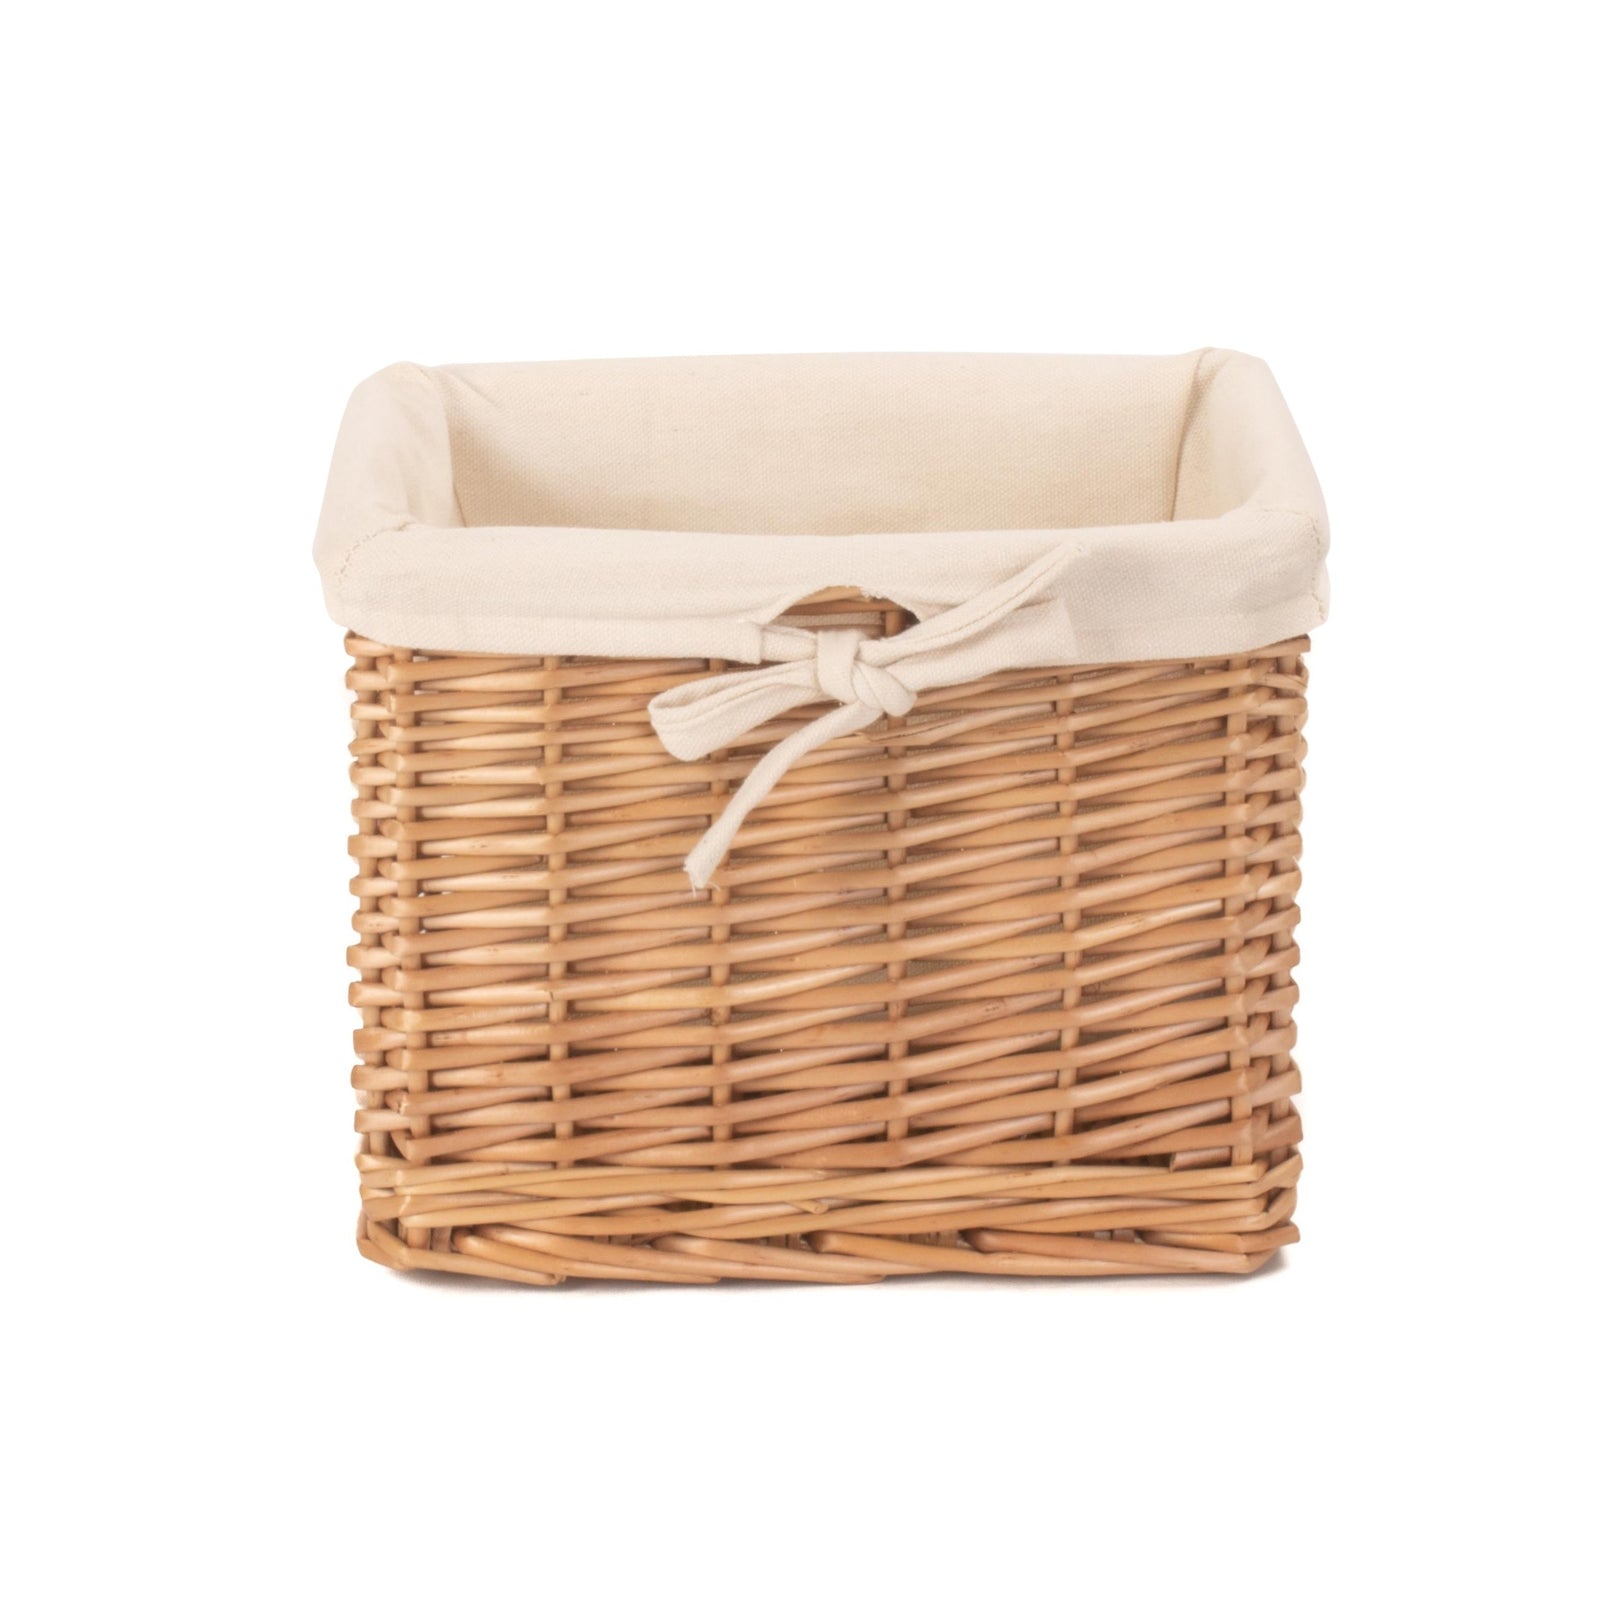 Red Hamper Wicker Small Deep Storage Basket With Cotton Lining